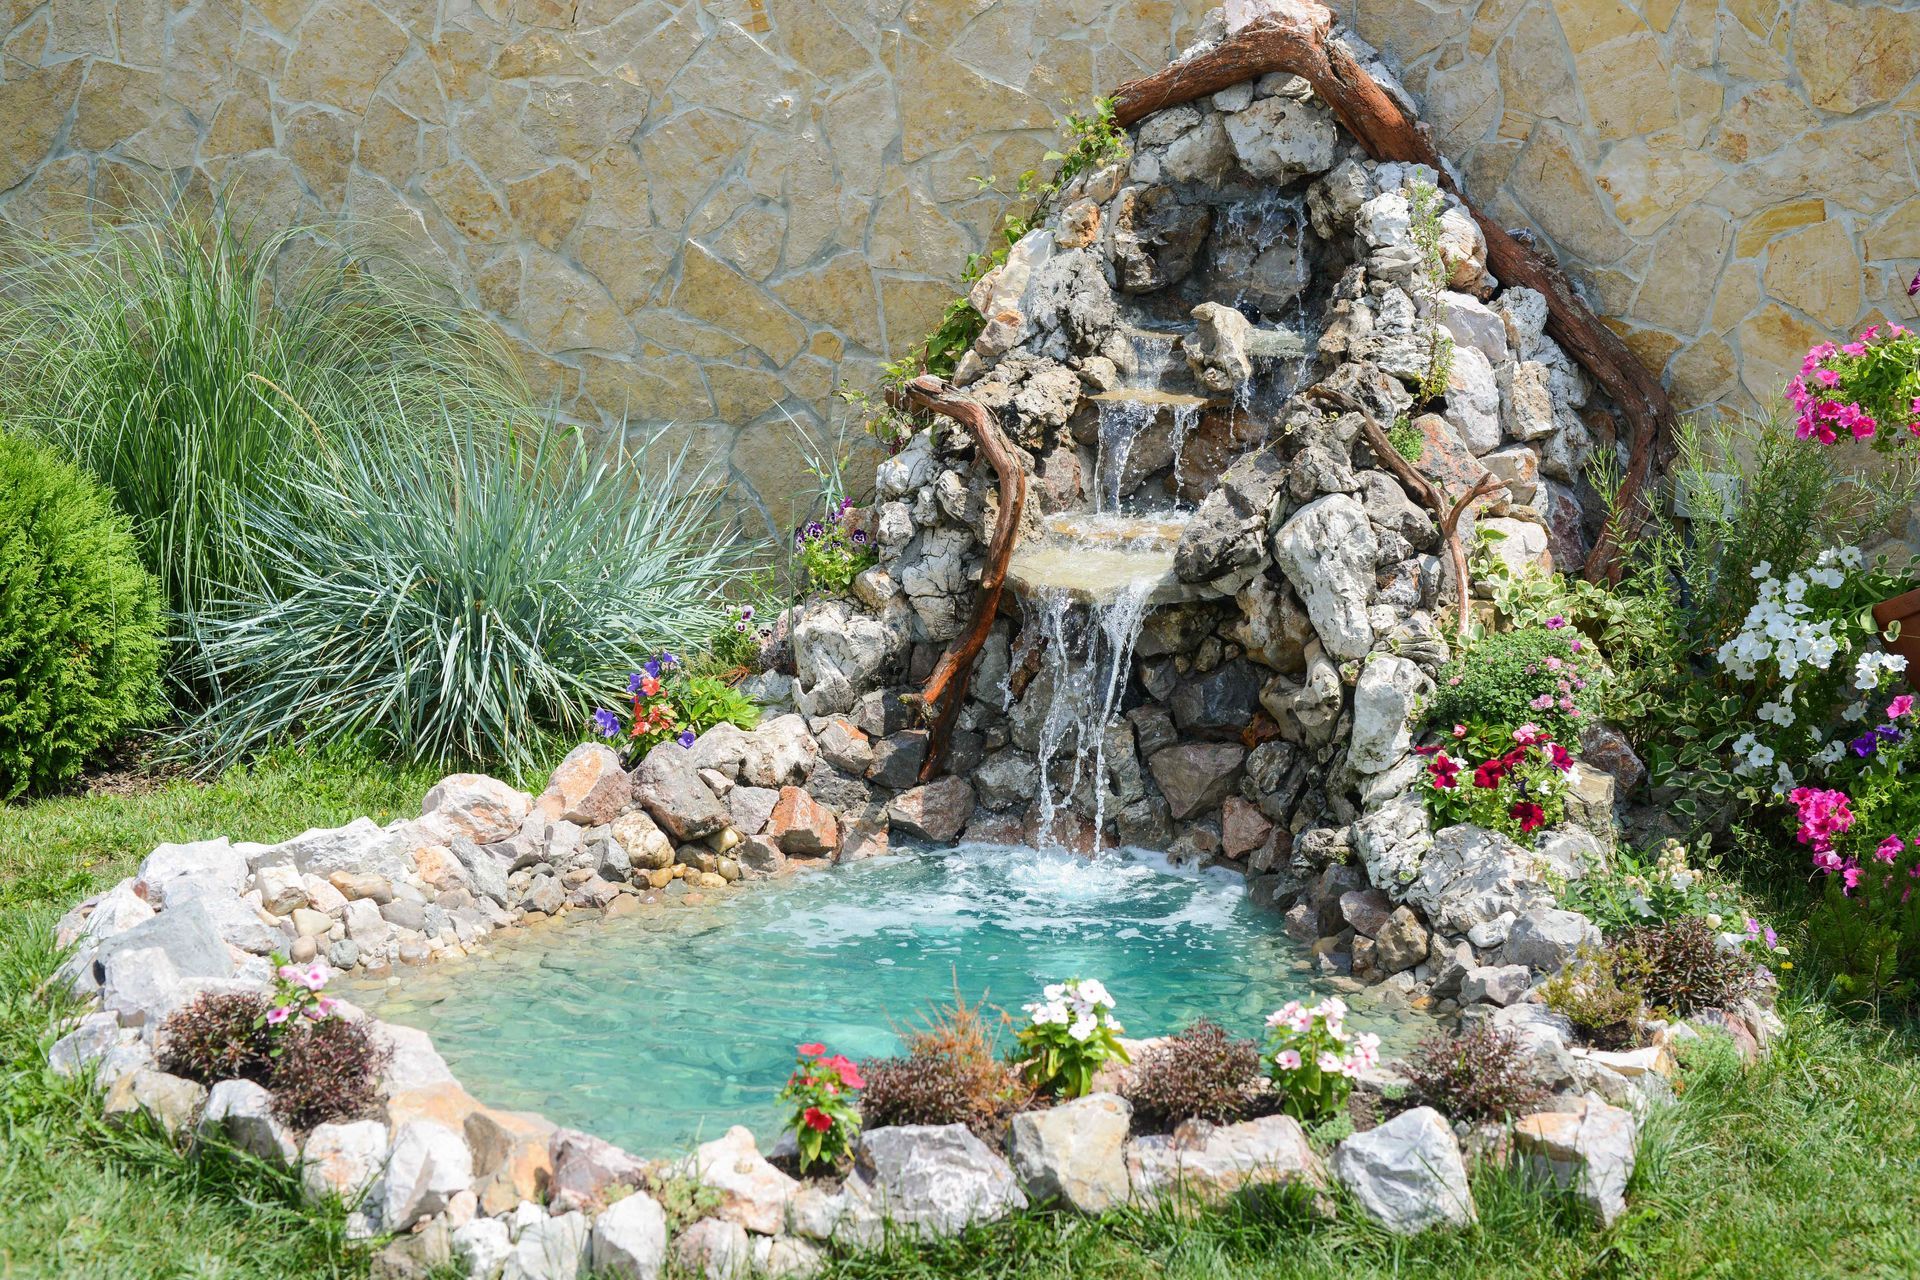 A Waterfall Flowing Into A Pool, The Water Feature Is Made Out Of Small Stones